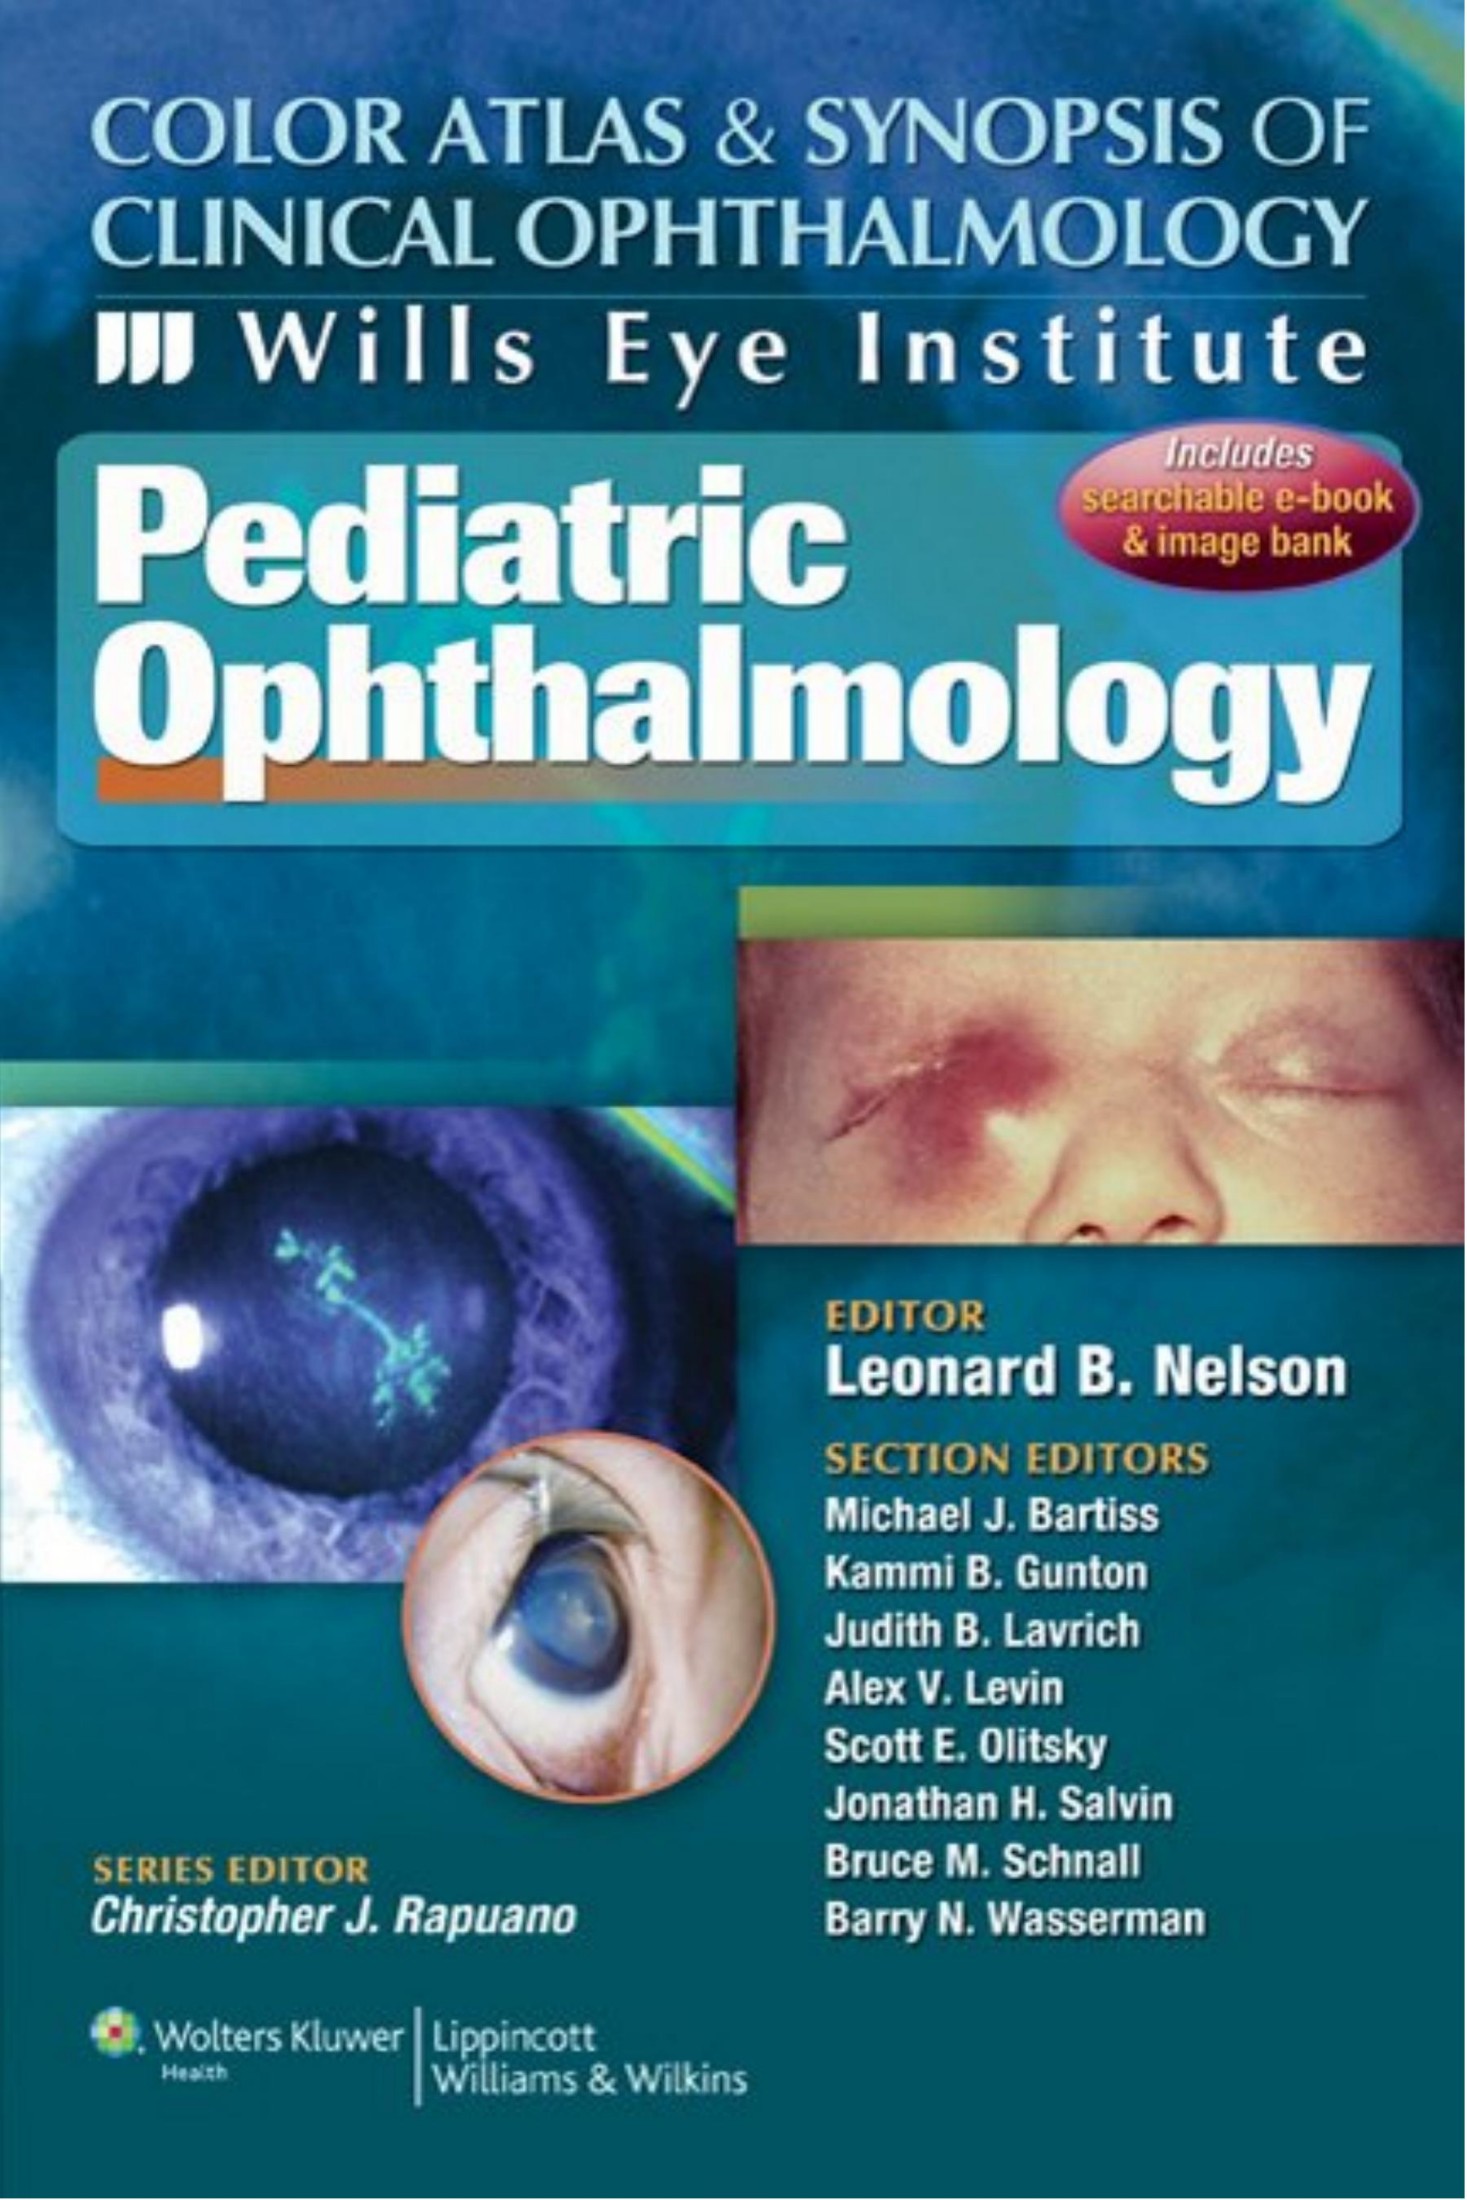 Color Atlas & Synopsis of Clinical Ophthalmology - Wills Eye Institute Pediatric Ophthalmology-